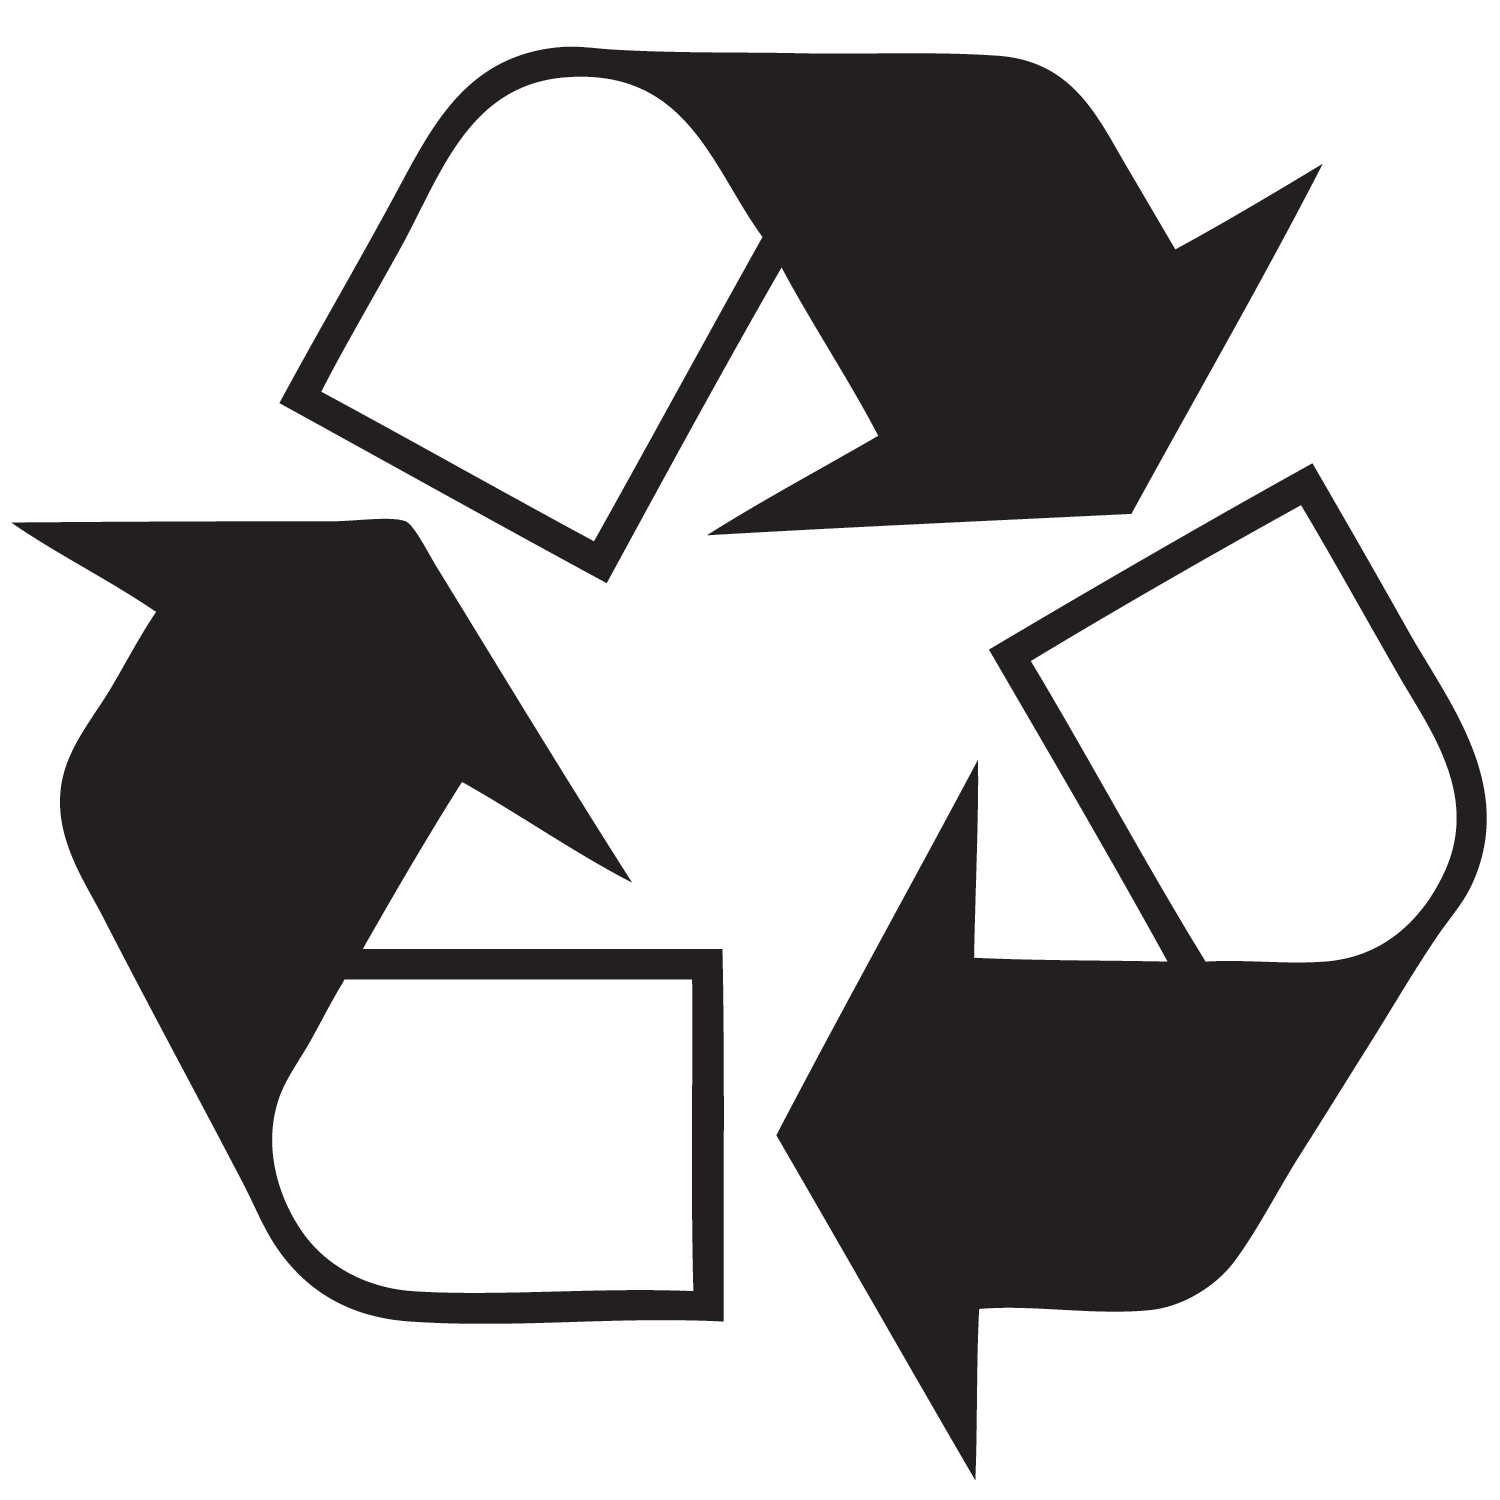 Free Recycle Symbol, Download Free Clip Art, Free Clip Art